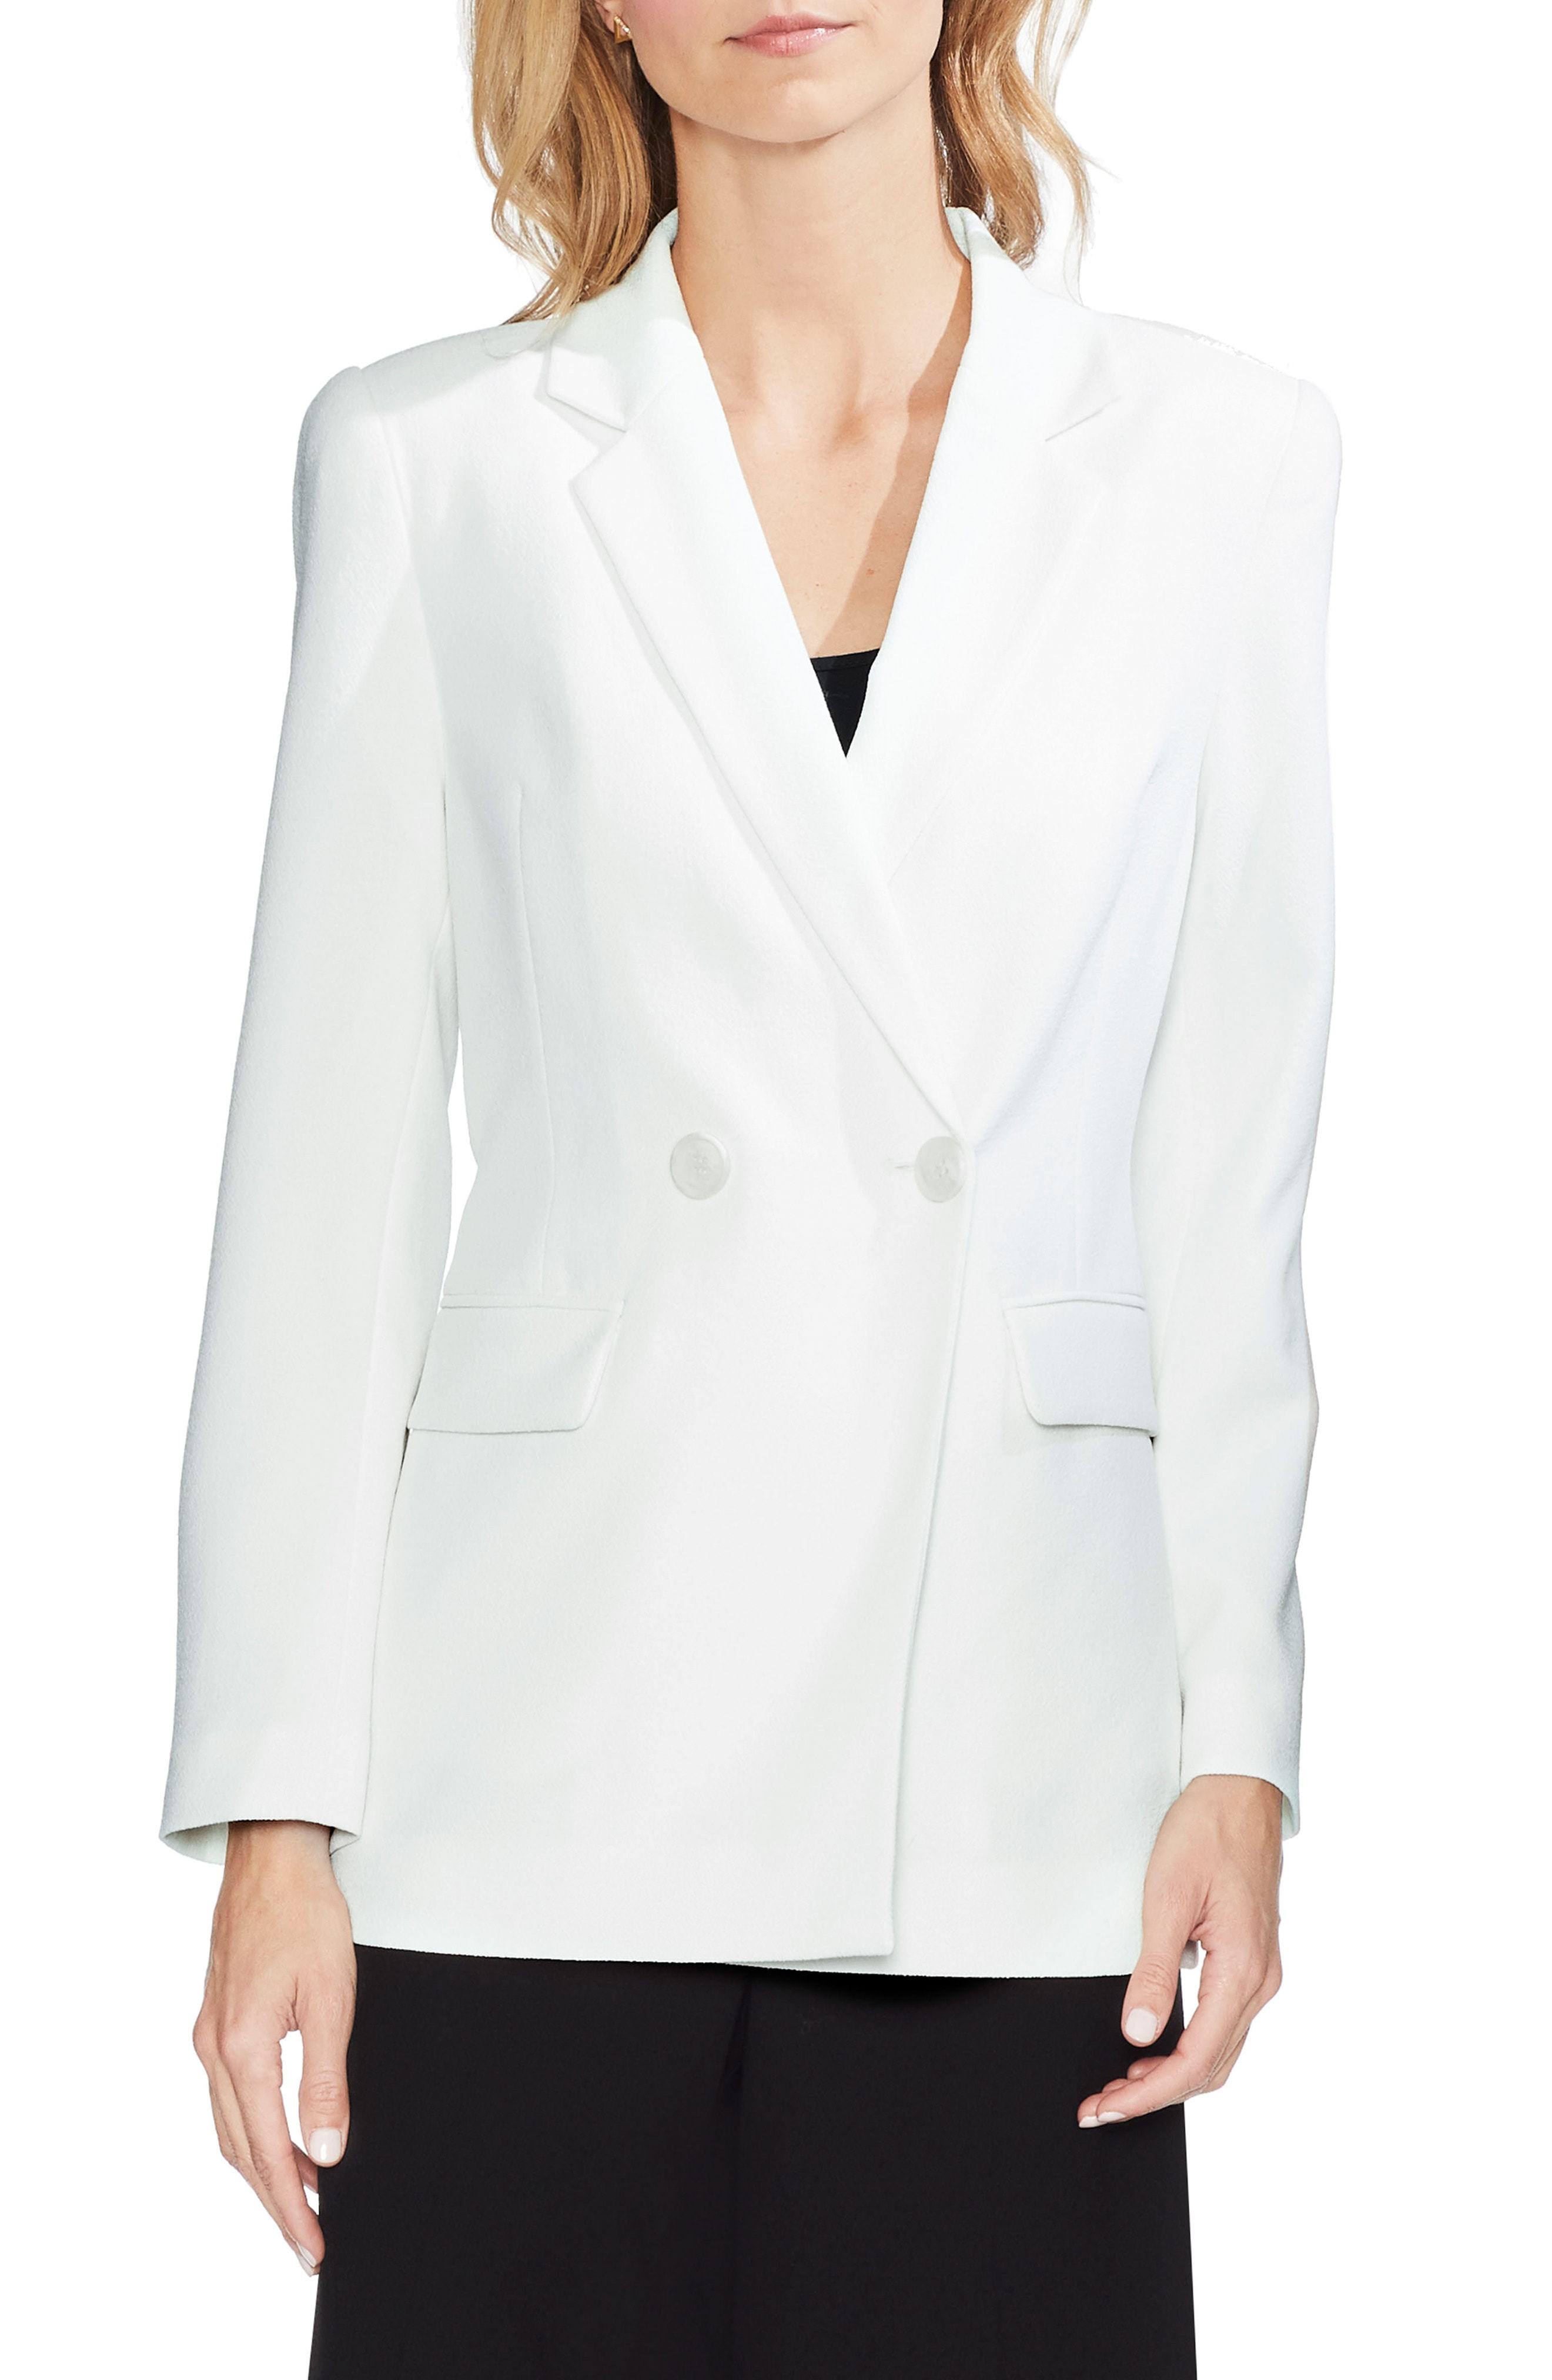 Vince Camuto Parisian Crepe Double Breasted Blazer, $159 | Nordstrom ...